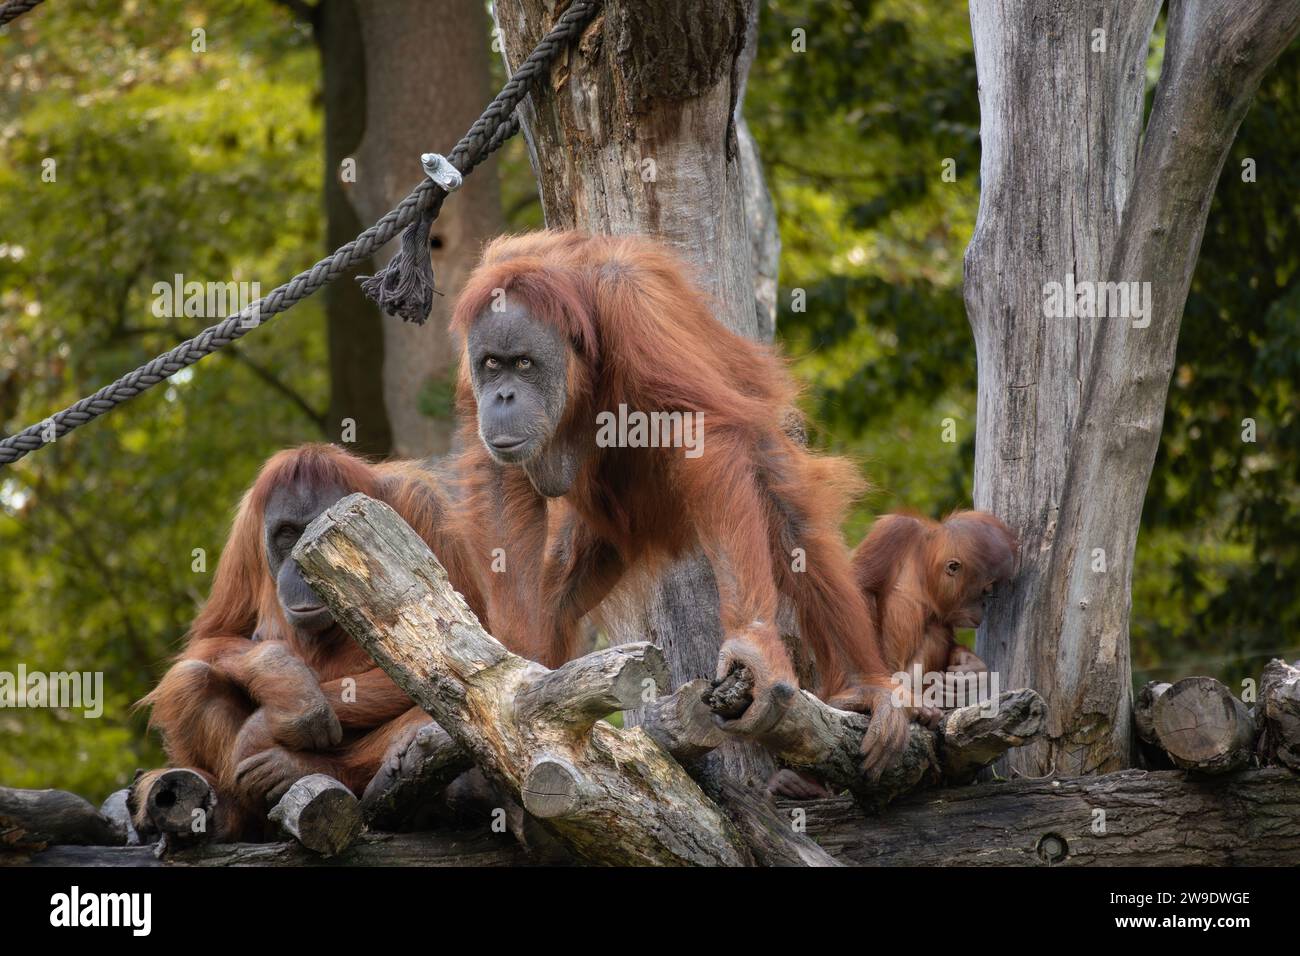 Family of Sumatran Orangutans in Zoological Garden. Great Apes in Zoo. Critically Endangered Animals in Outdoor Park. Stock Photo